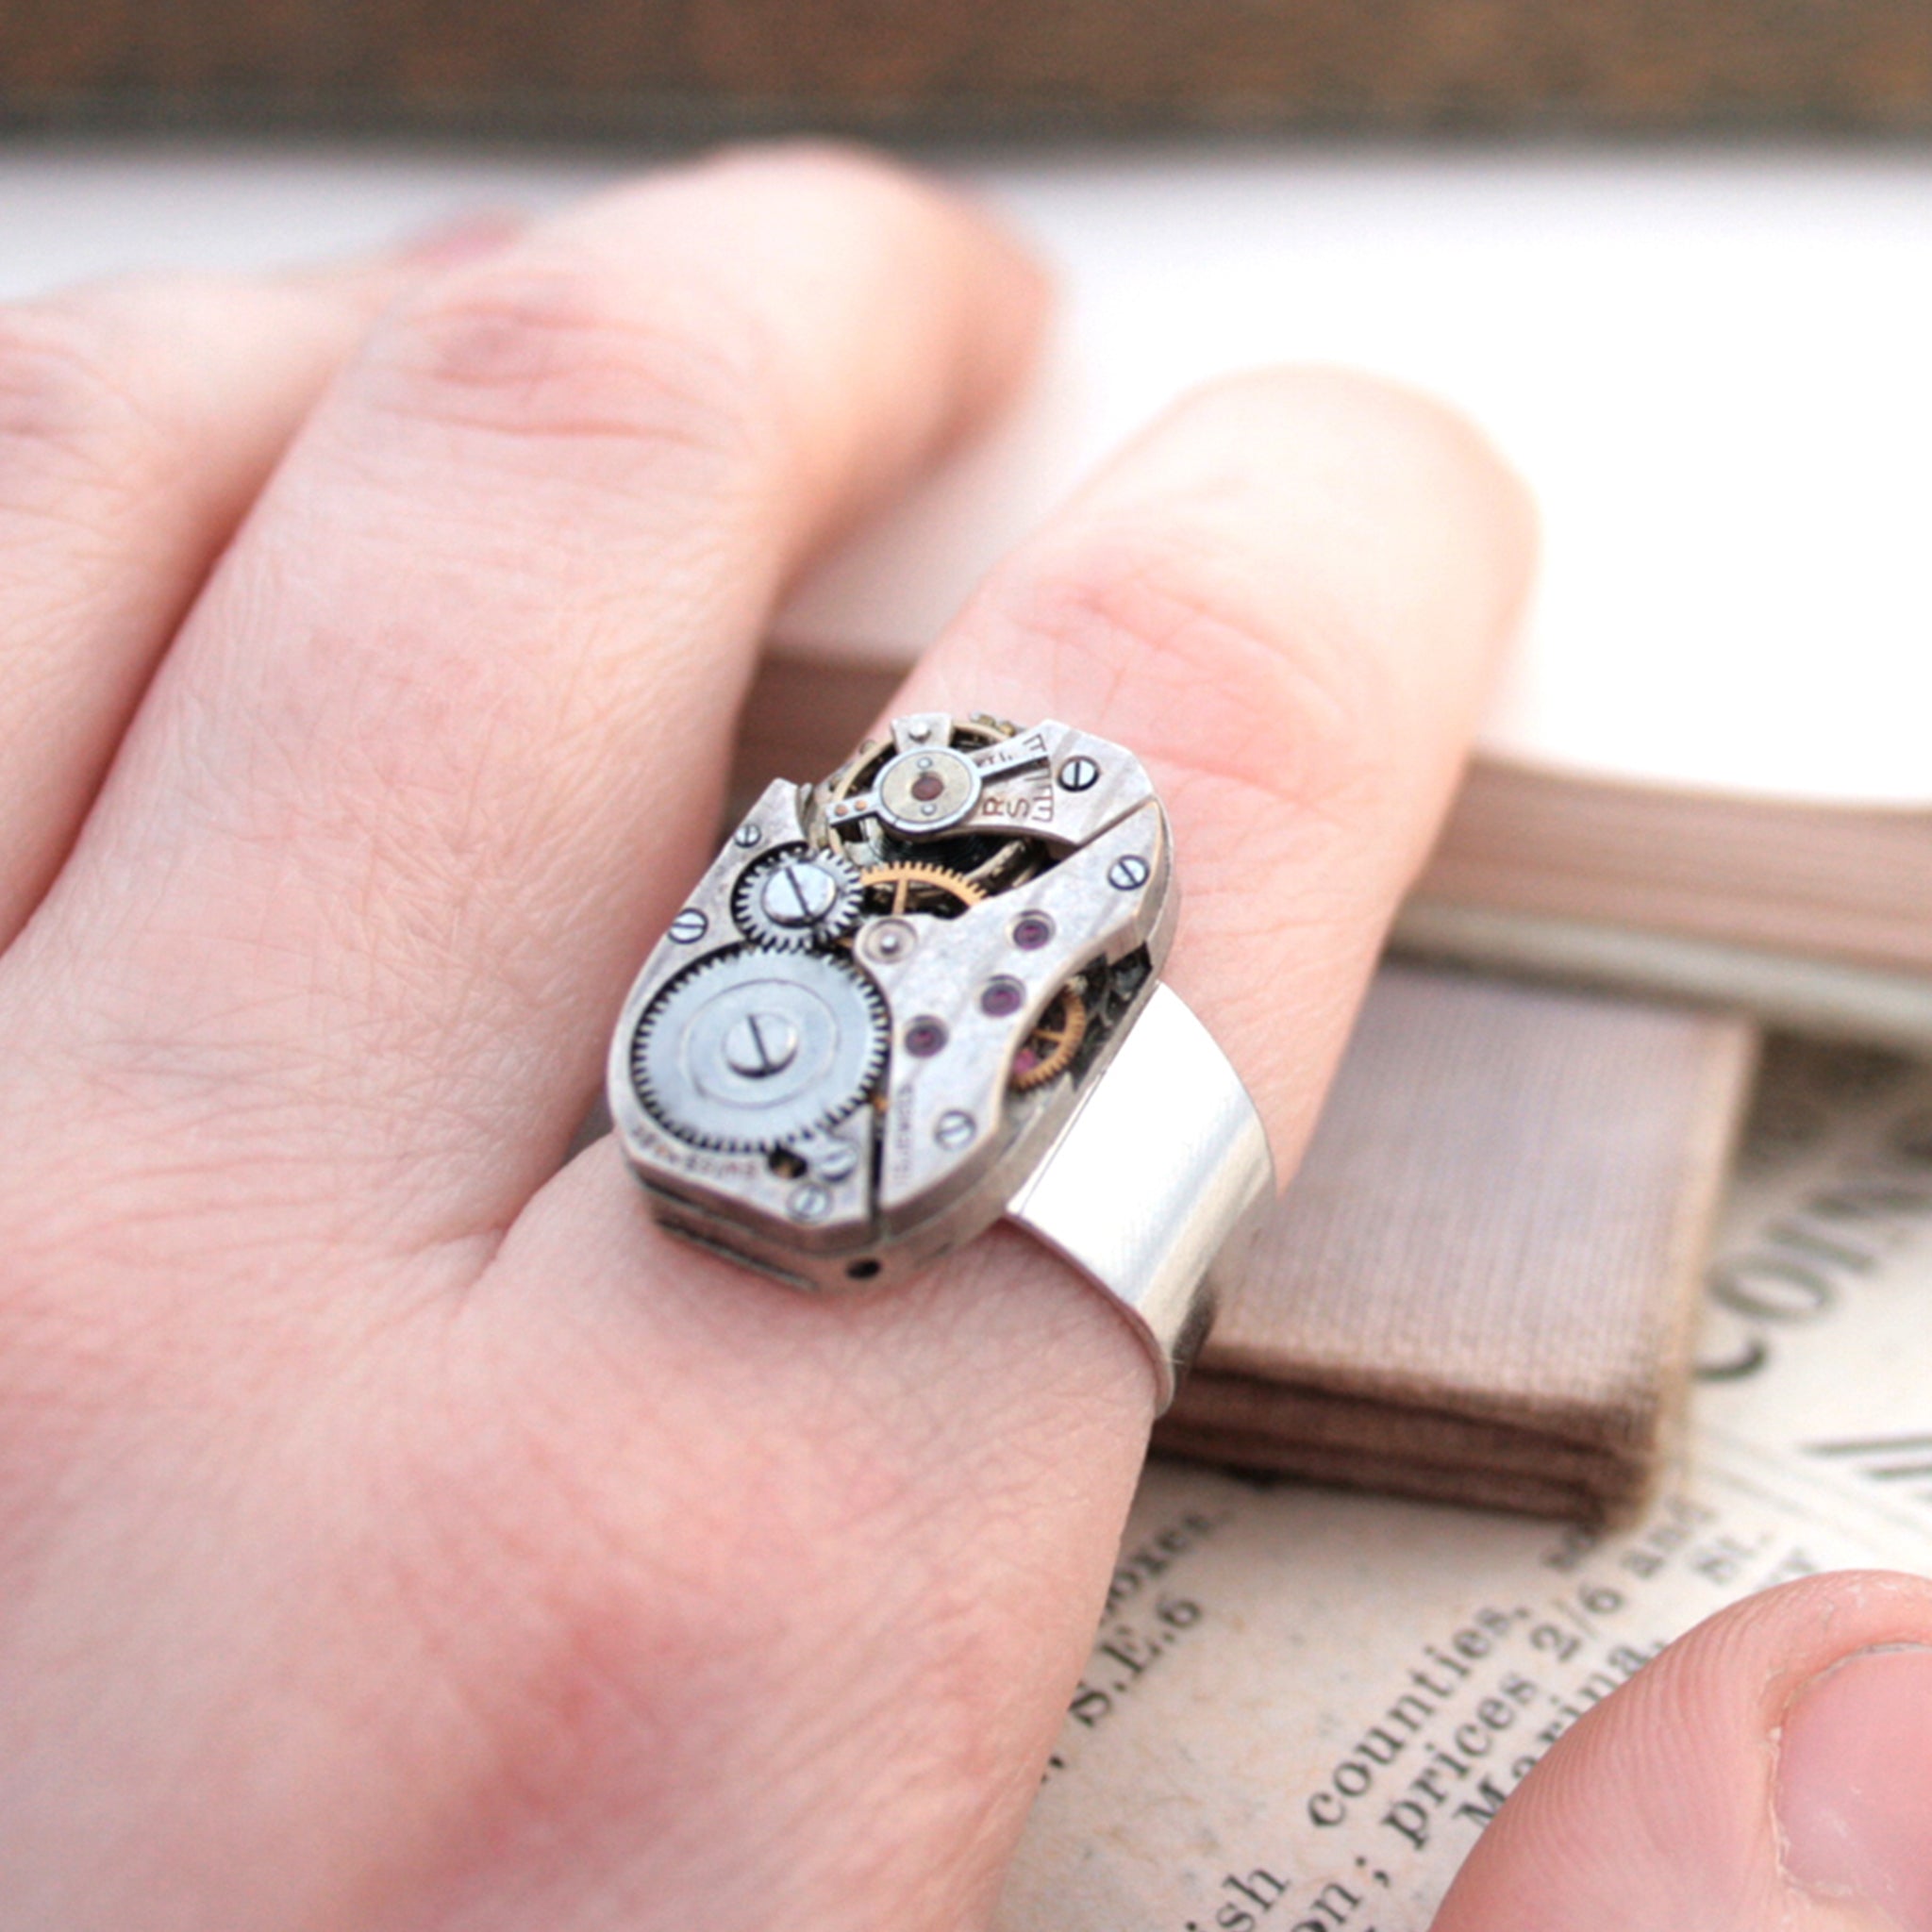 Signet Ring in Steampunk Style